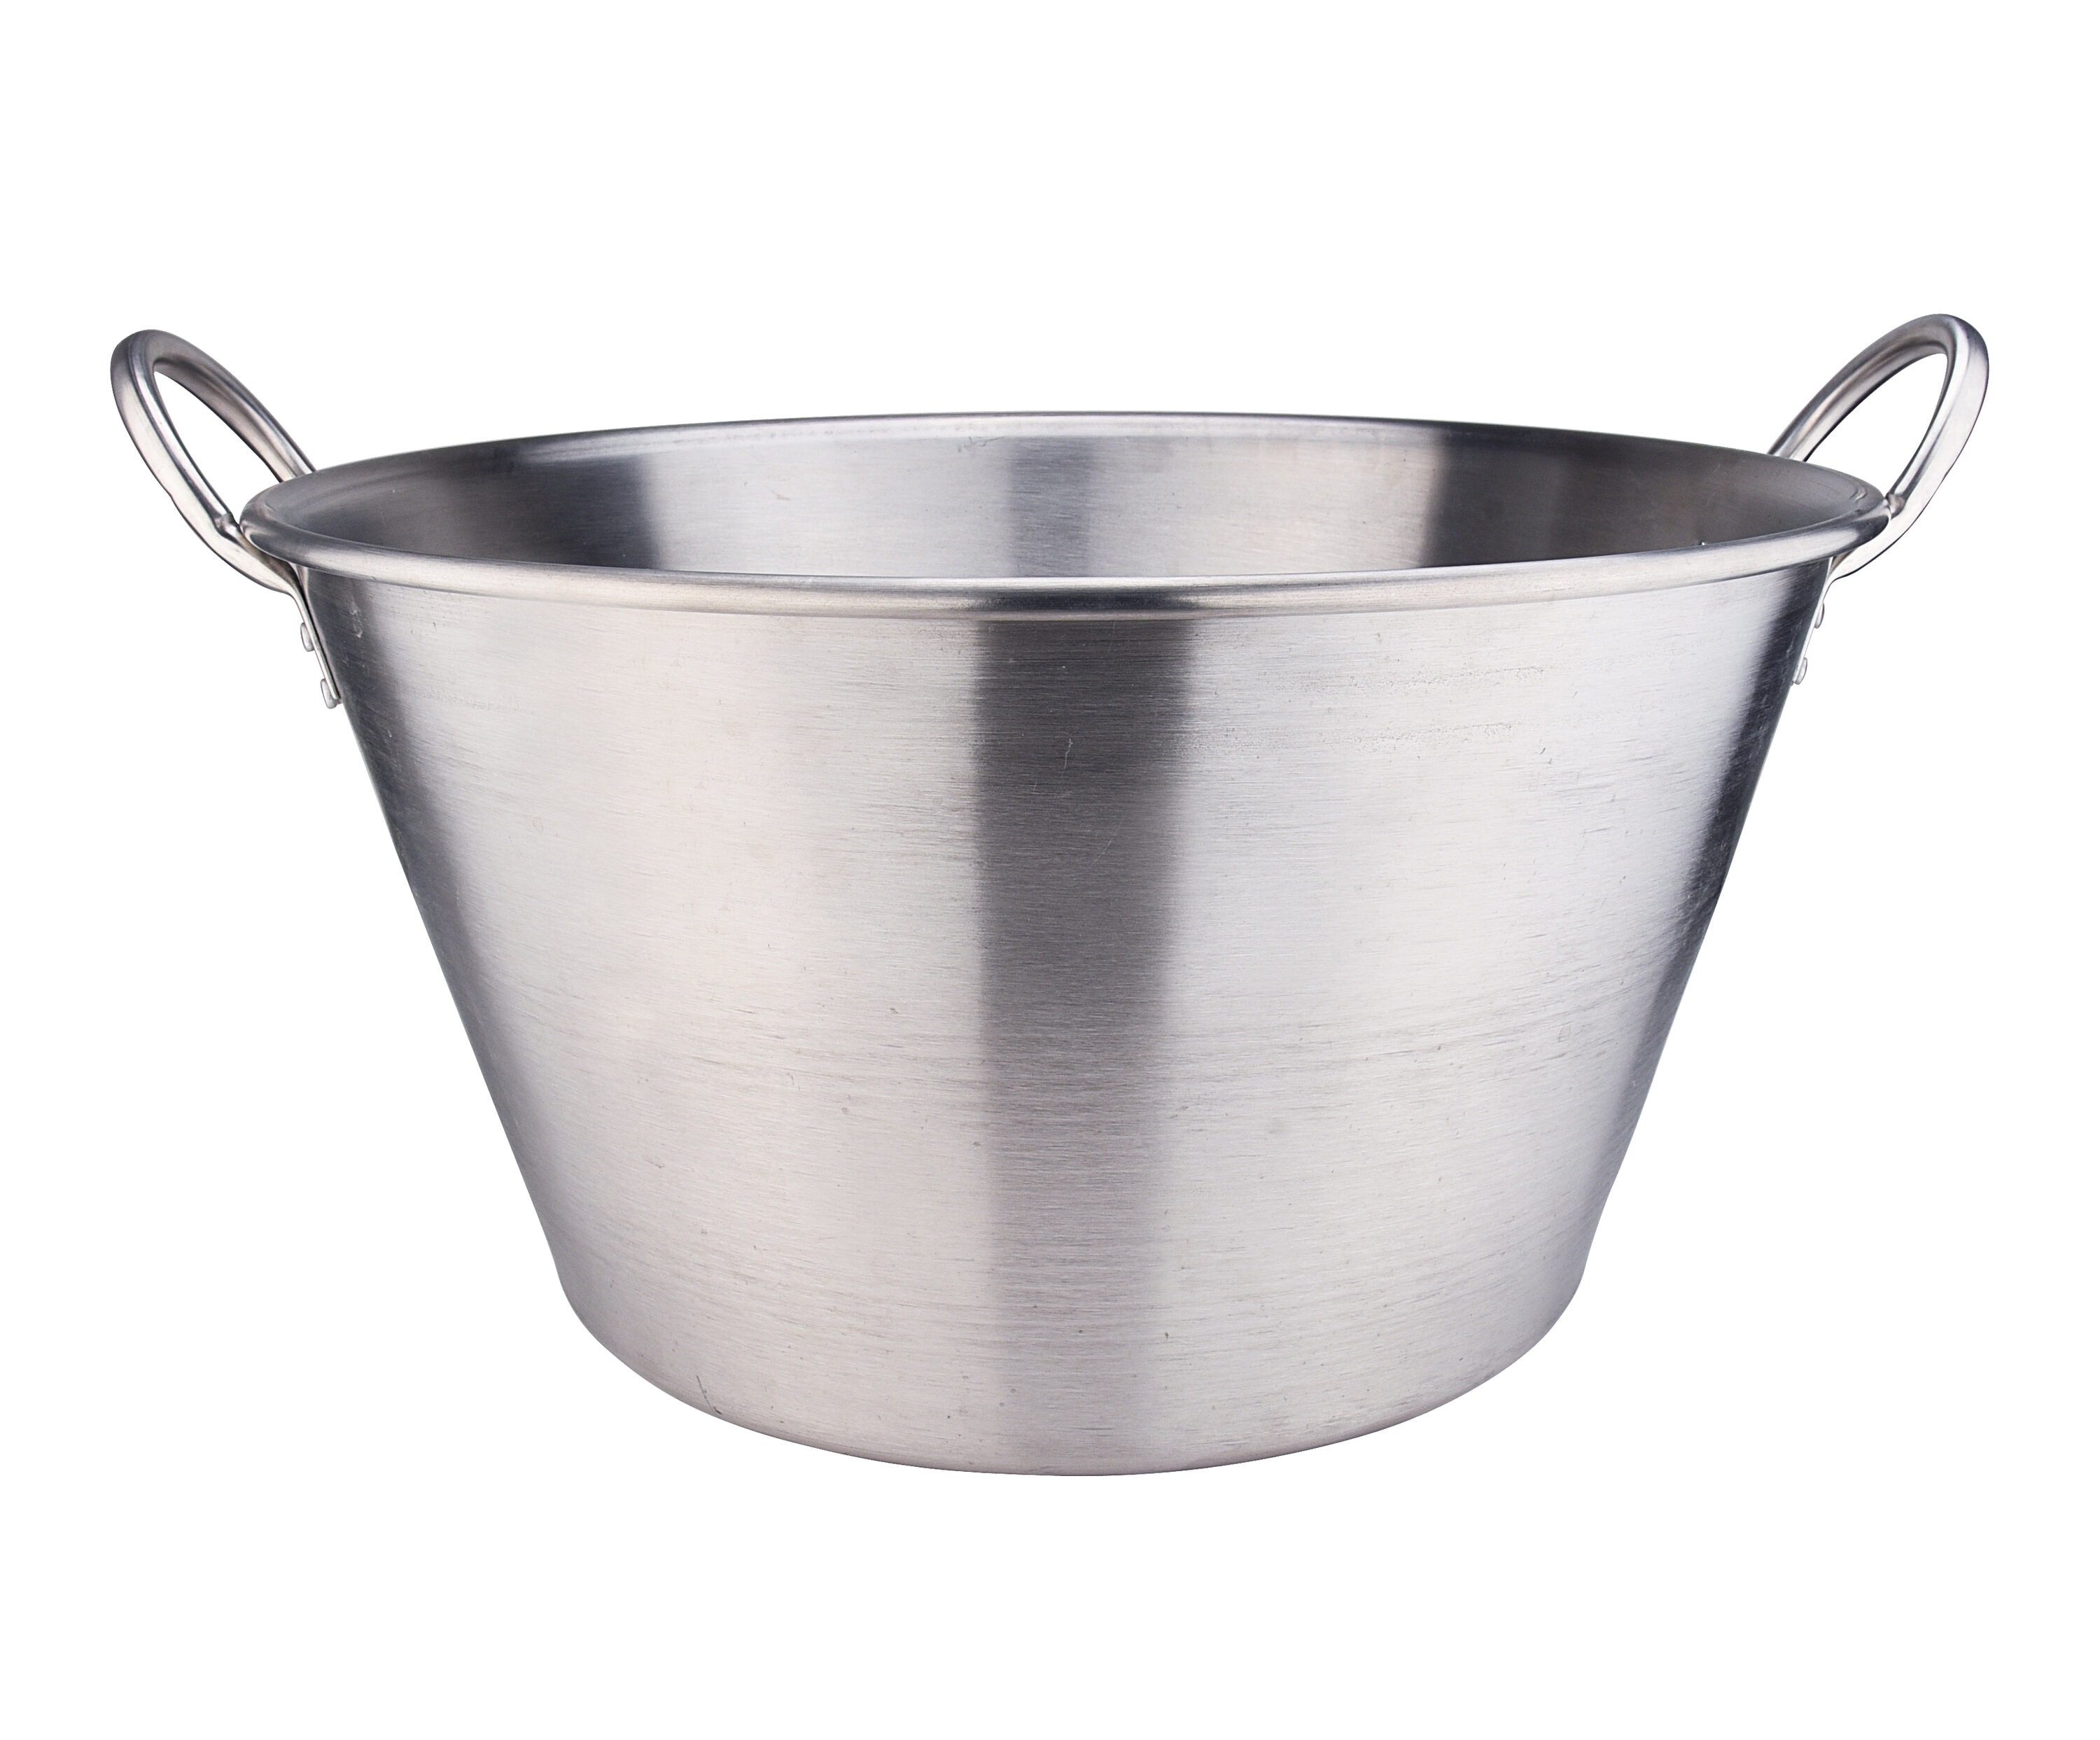 Huge 4-Handles Extra Large XXL 33'' Carnitas Cazo Stainless Steel